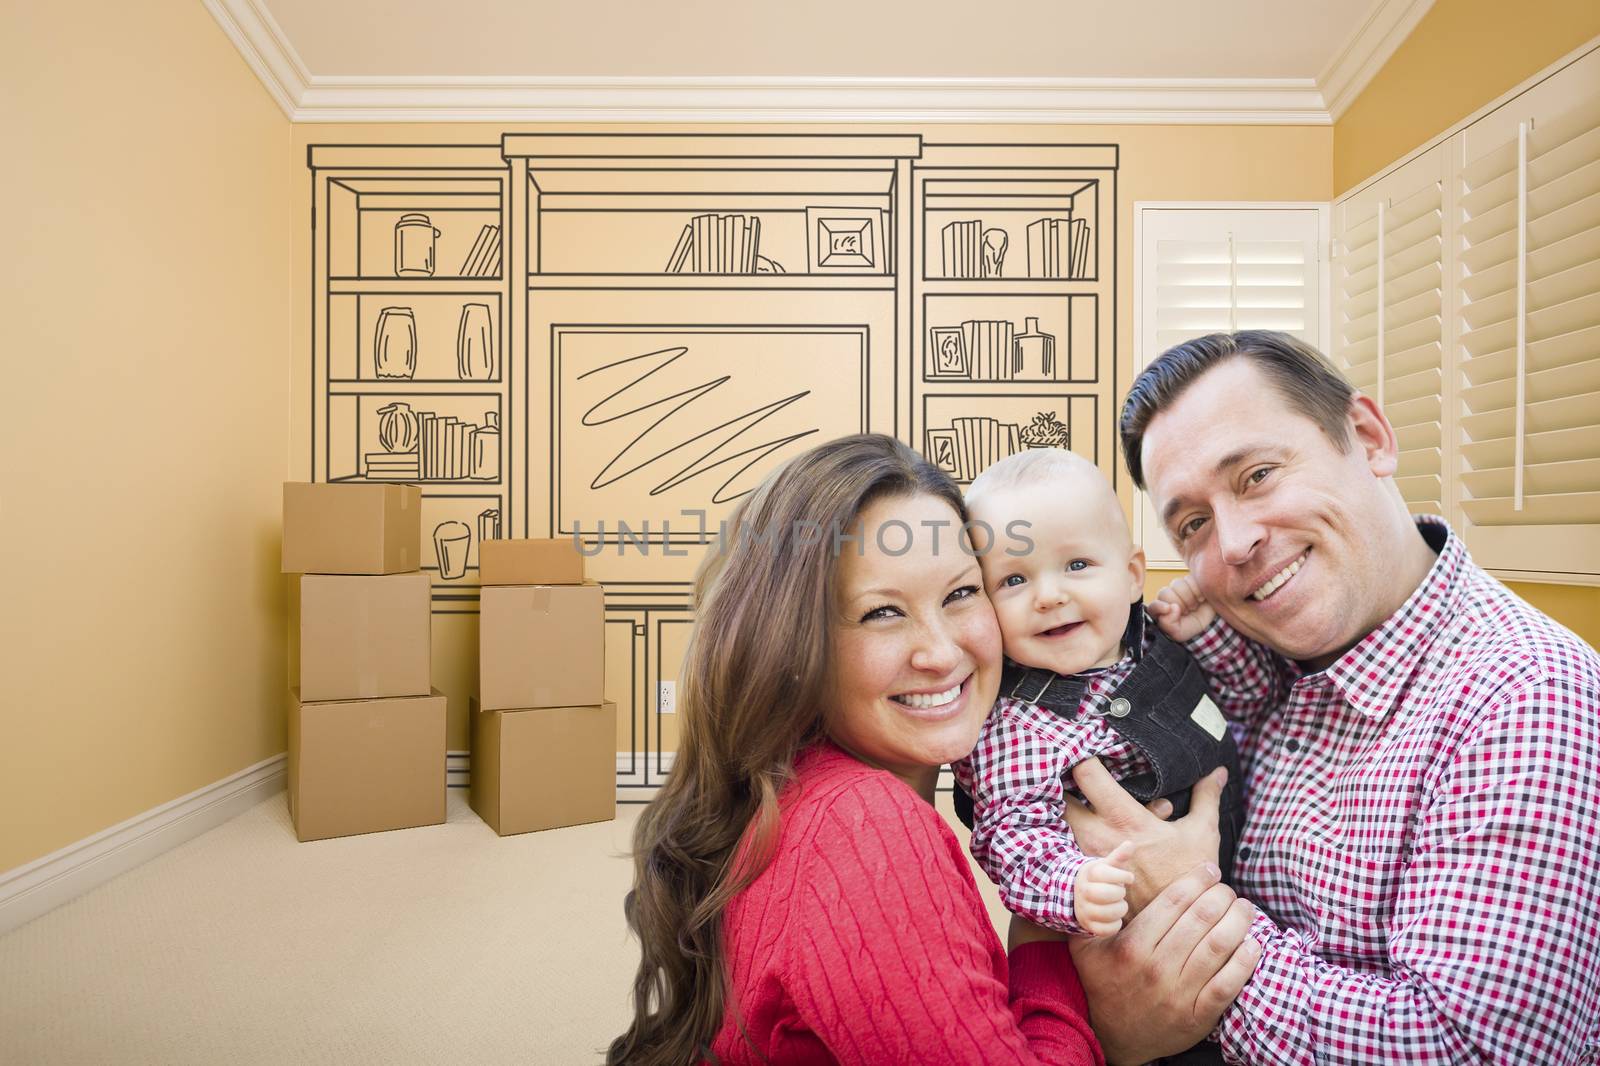 Young Family In Room With Moving Boxes and Drawing of Entertainment Unit On Wall.